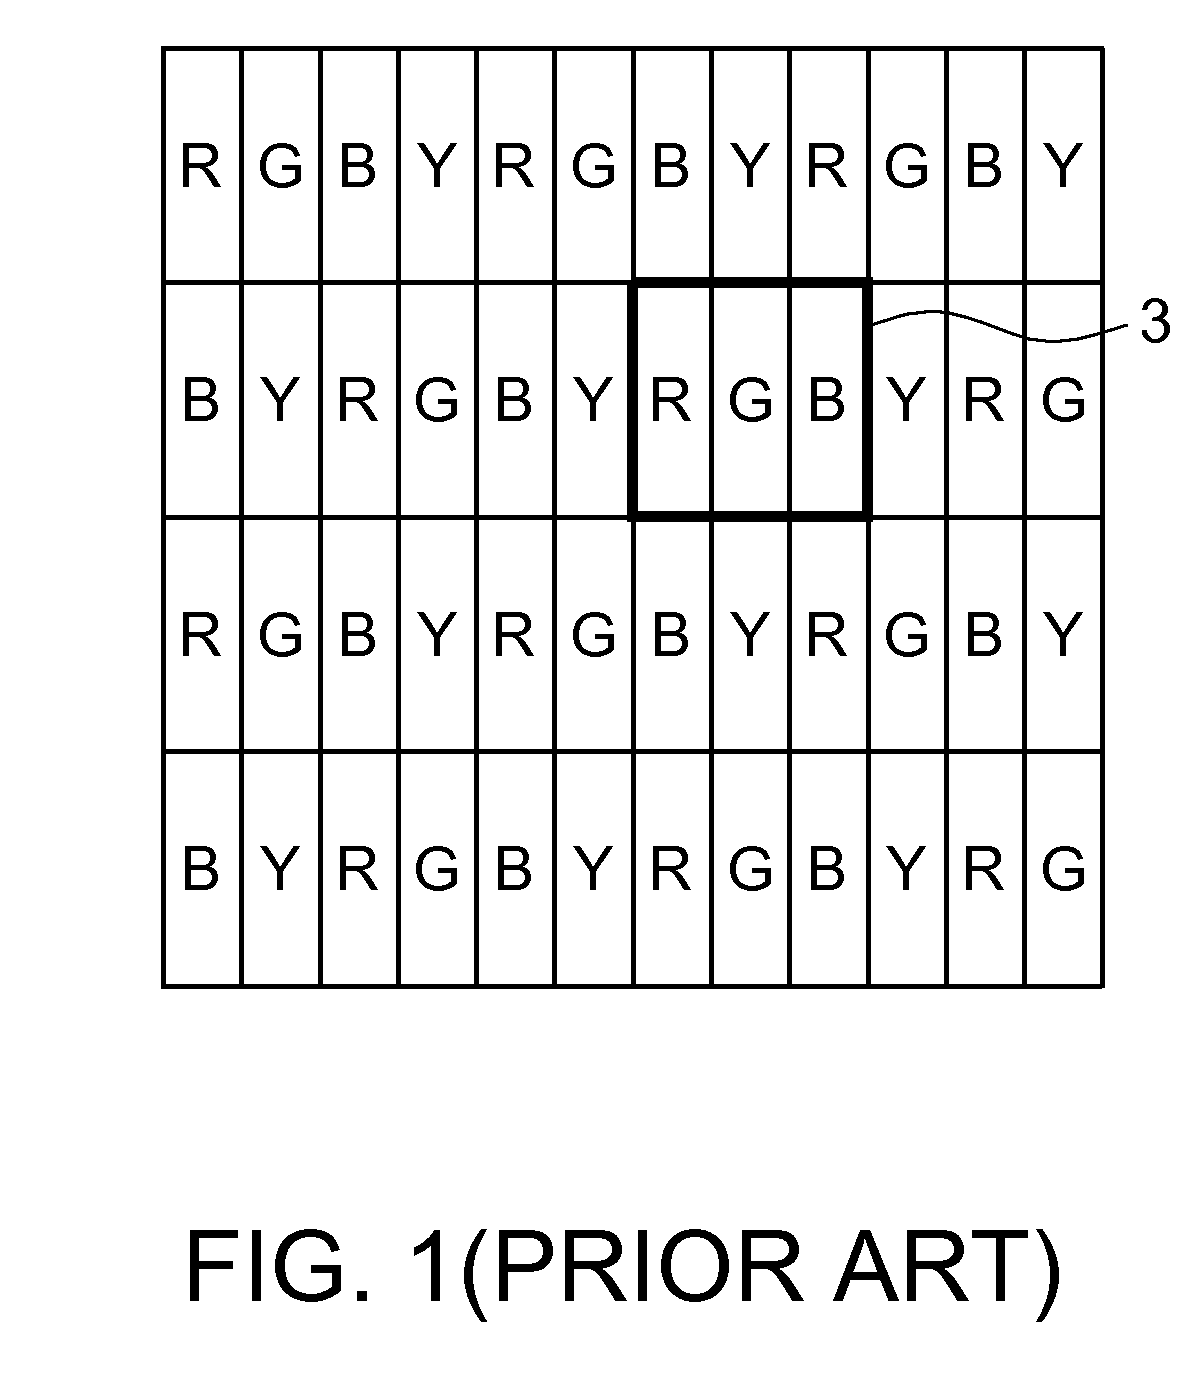 Image processing method, image data conversion method and device thereof